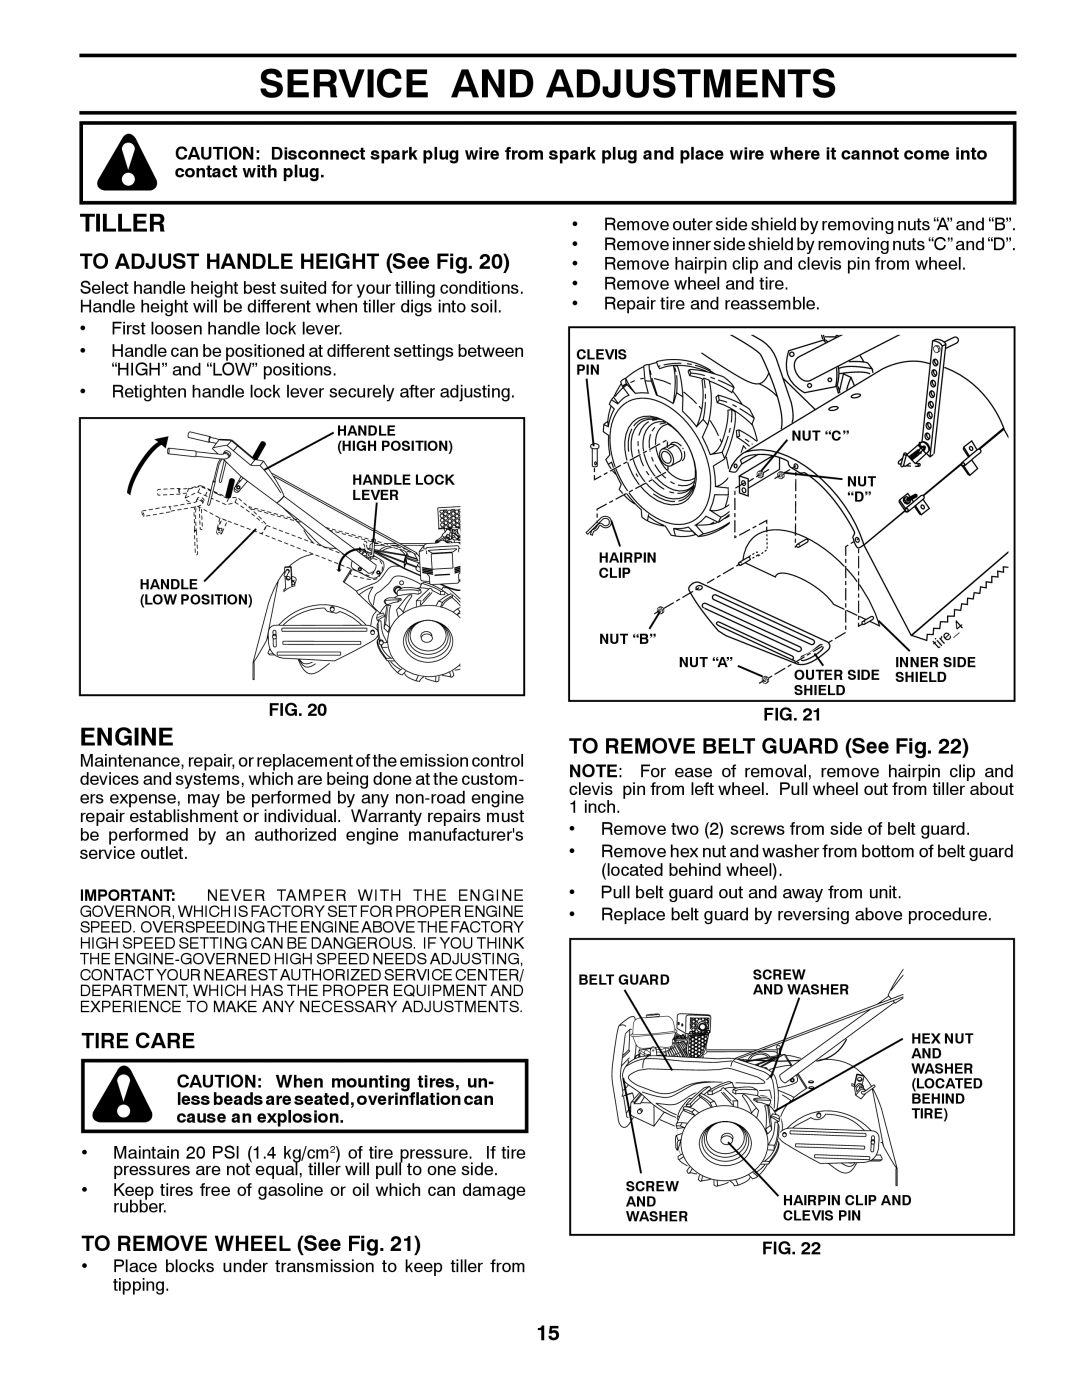 Poulan 423813 Service And Adjustments, Tiller, TO ADJUST HANDLE HEIGHT See Fig, Tire Care, TO REMOVE WHEEL See Fig, Engine 